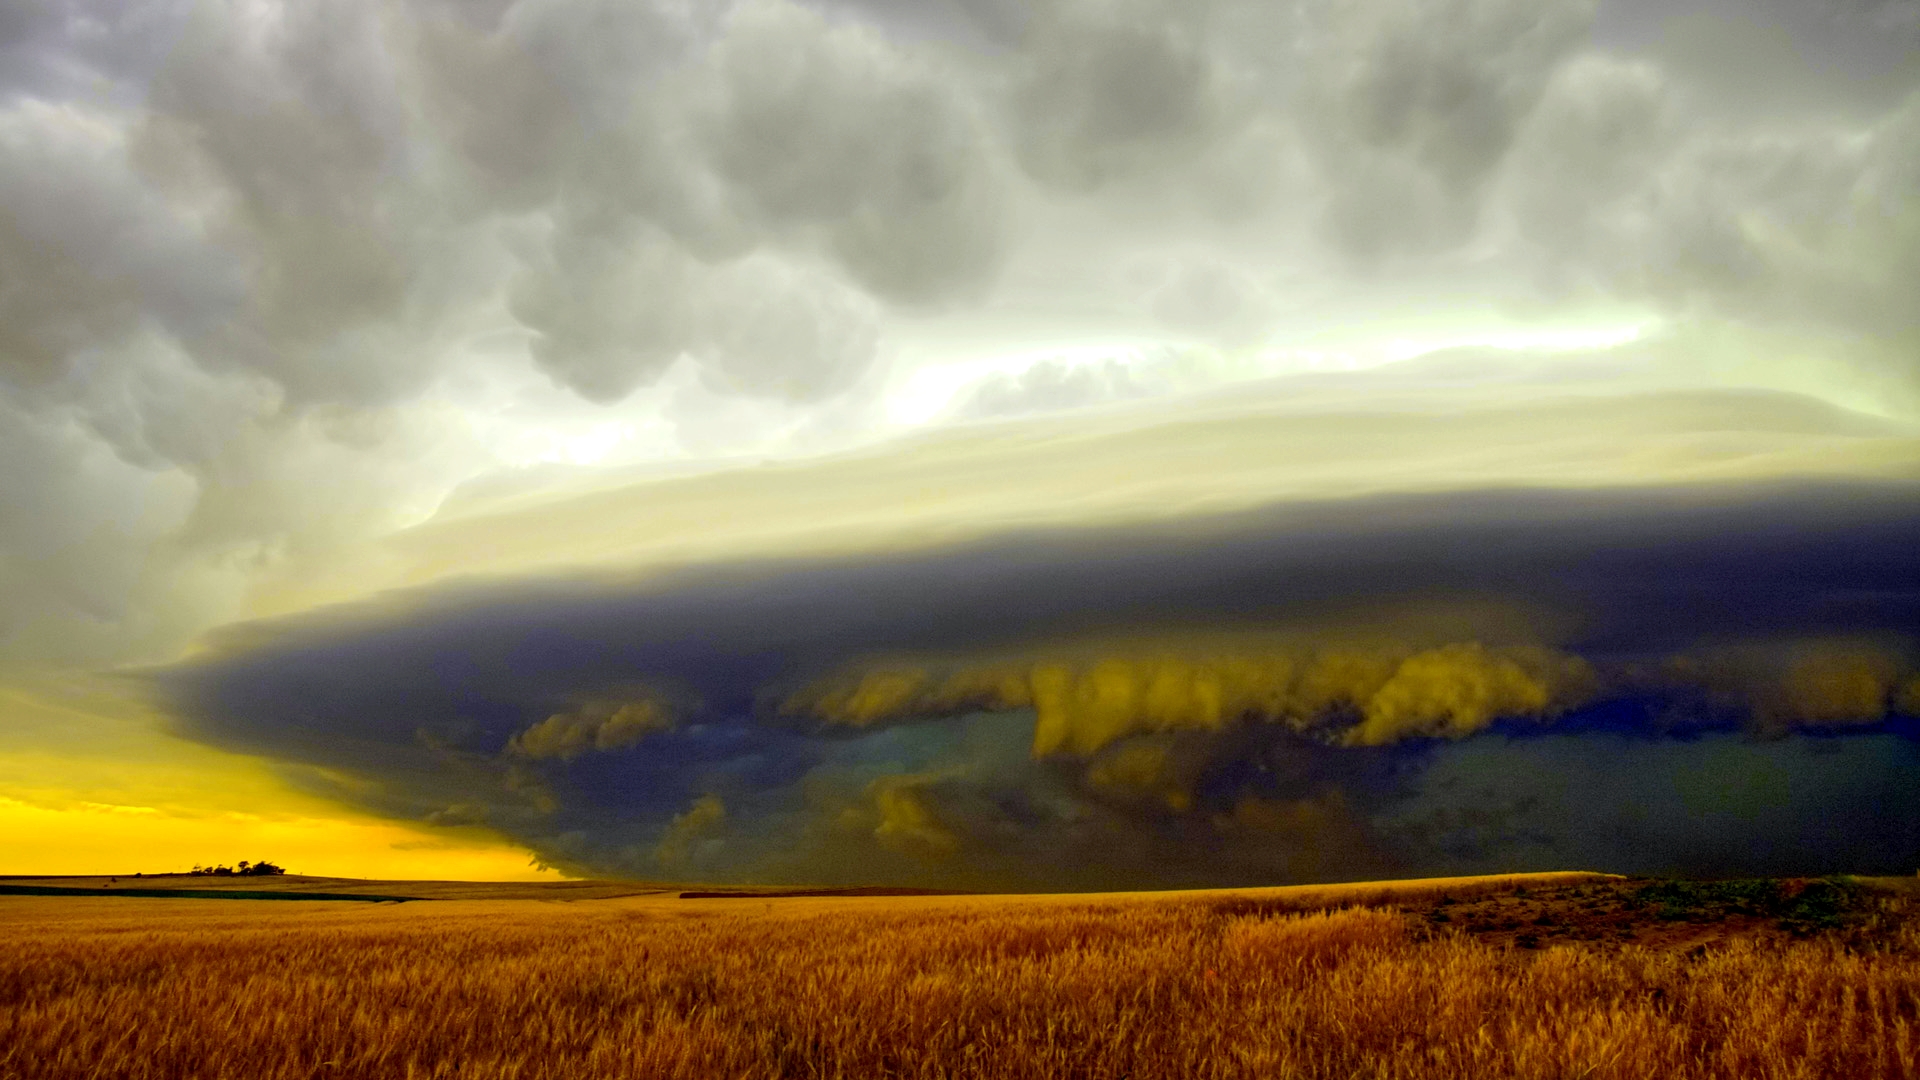 Storm Image Wallpaper High Definition Quality Widescreen